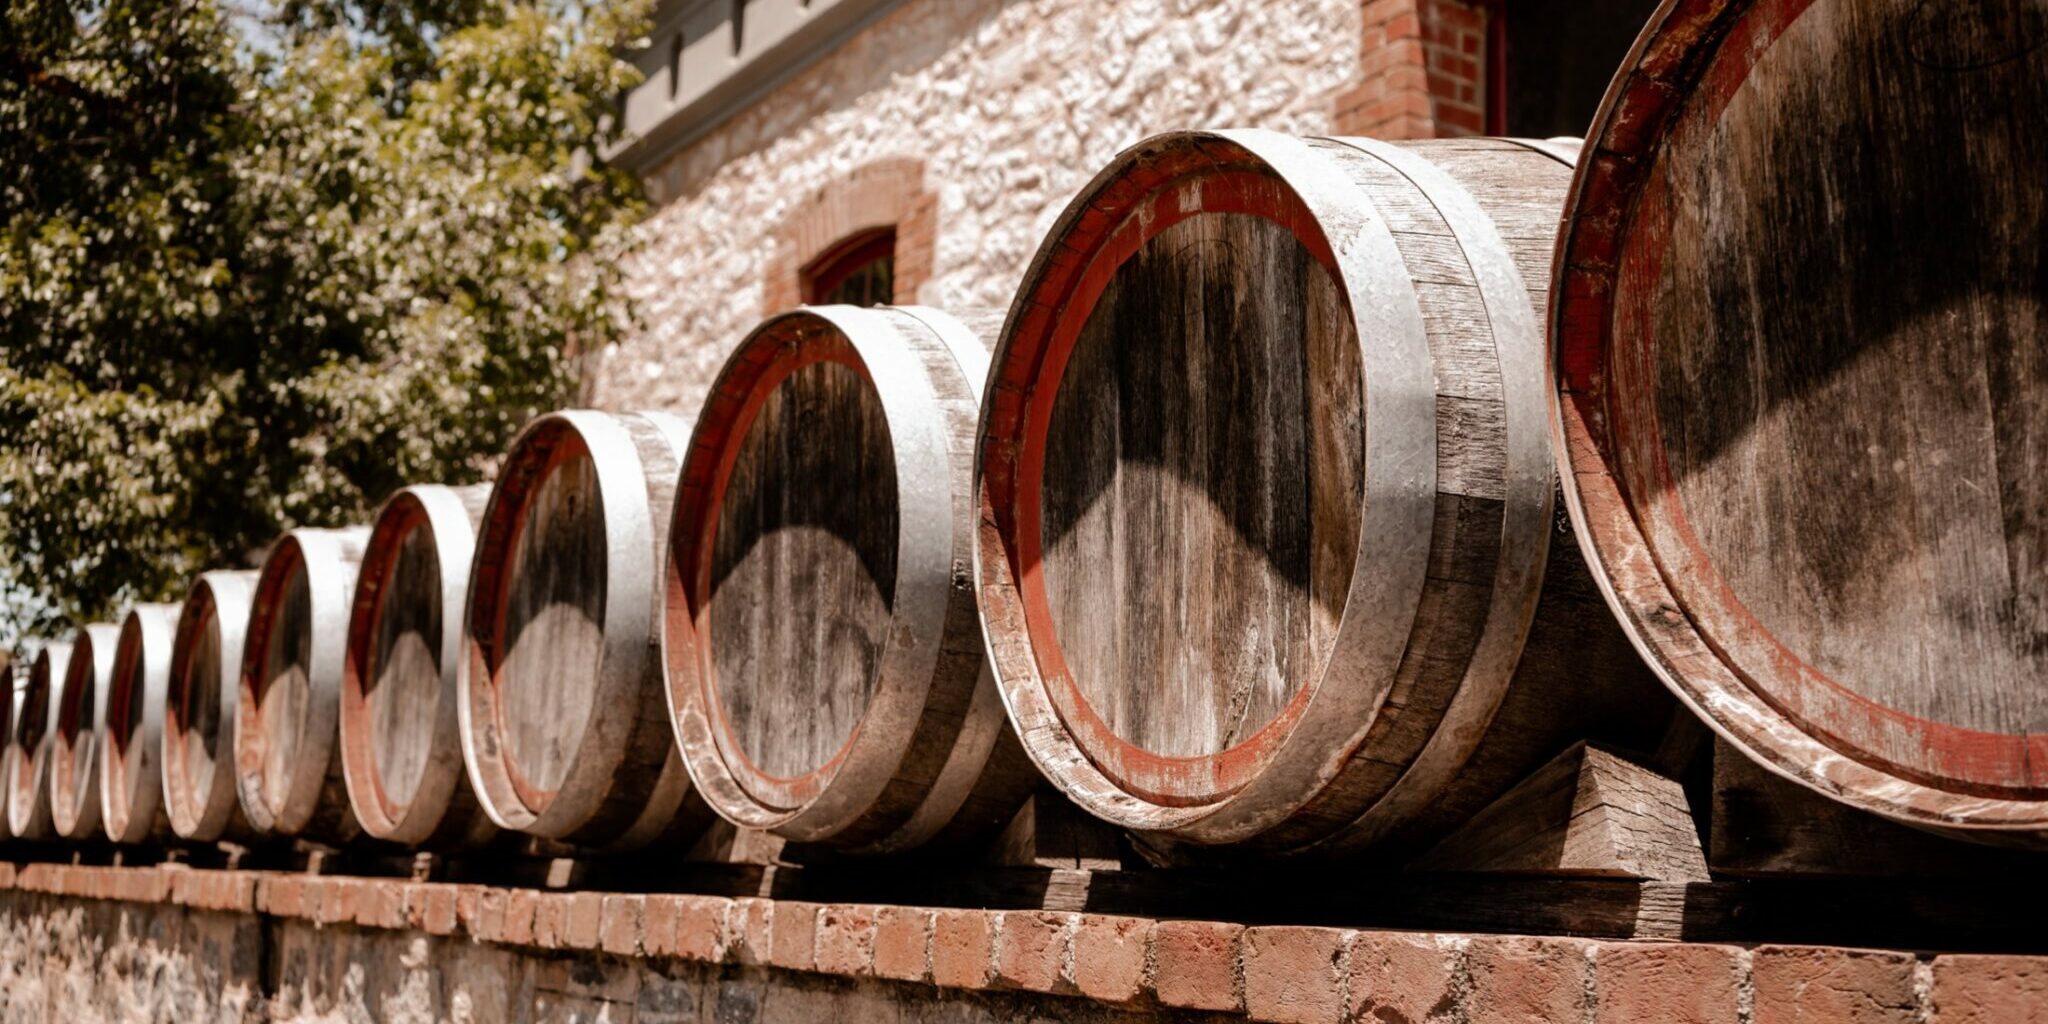 Wine barrels lined up on a brick wall